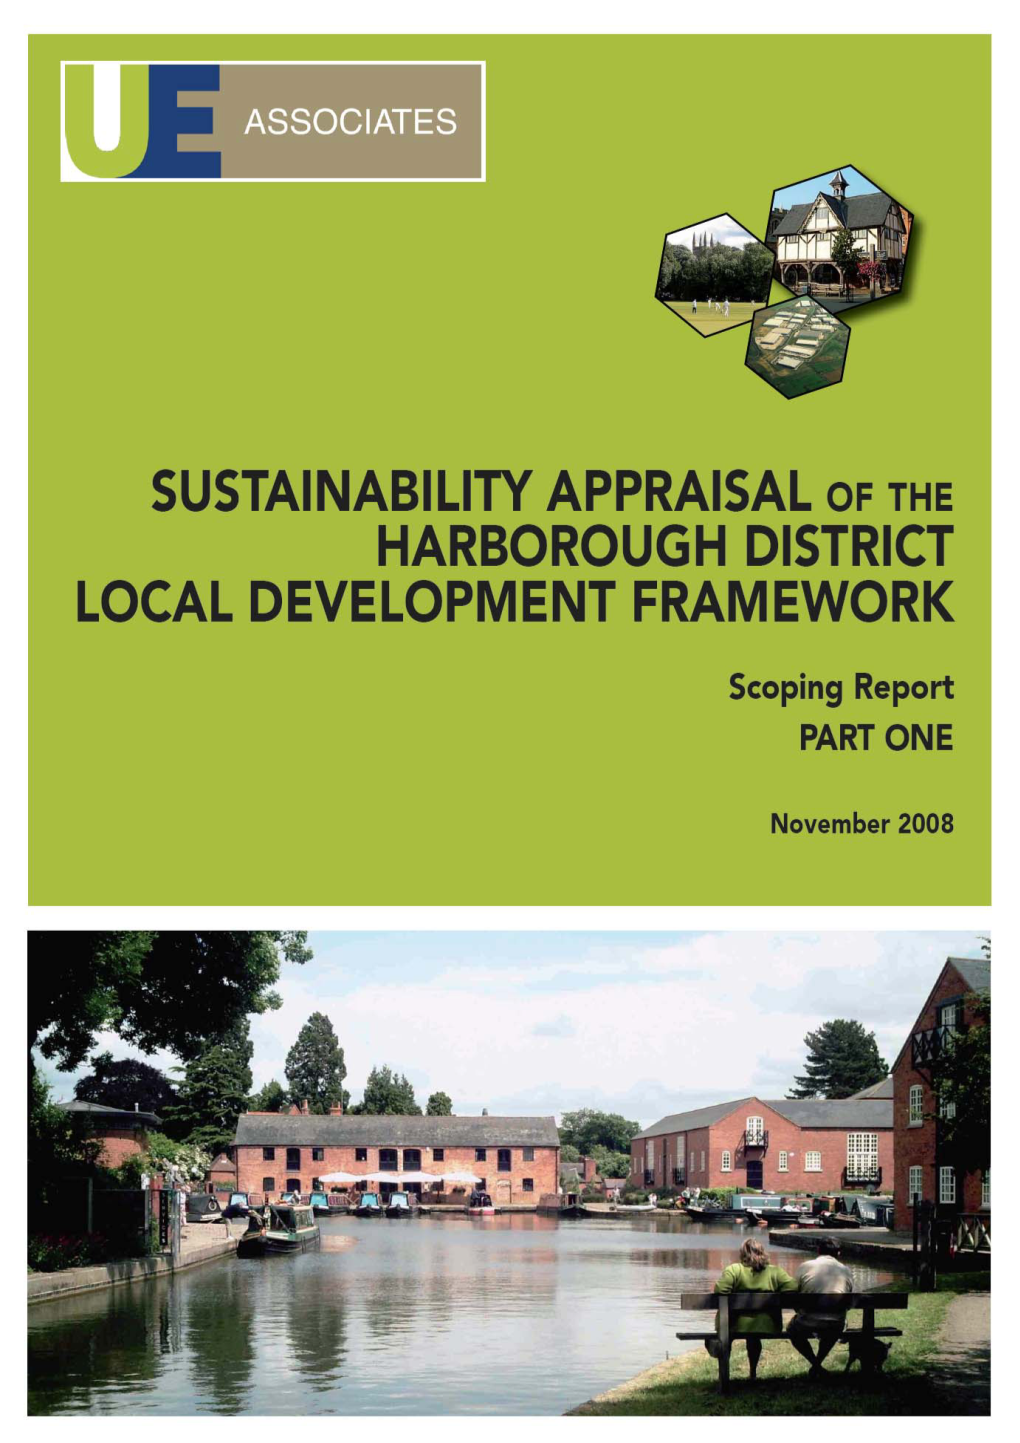 Sustainability Appraisal of the Harborough District Local